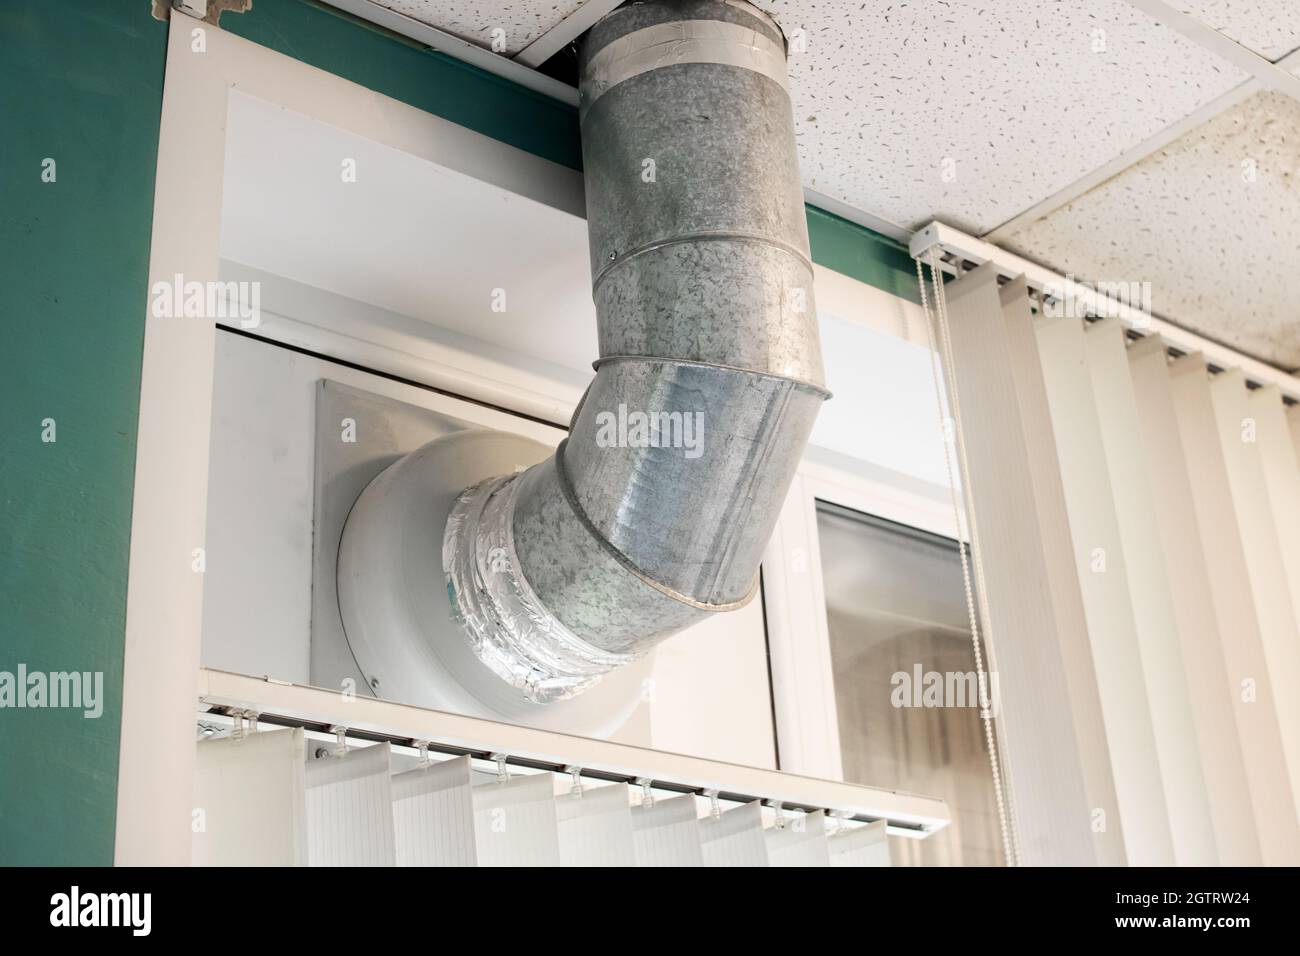 Fixing Ventilation Pipe To Exterior Wall Using a Mounting Installation Foam  Stock Photo - Image of alternative, pipe: 230031818